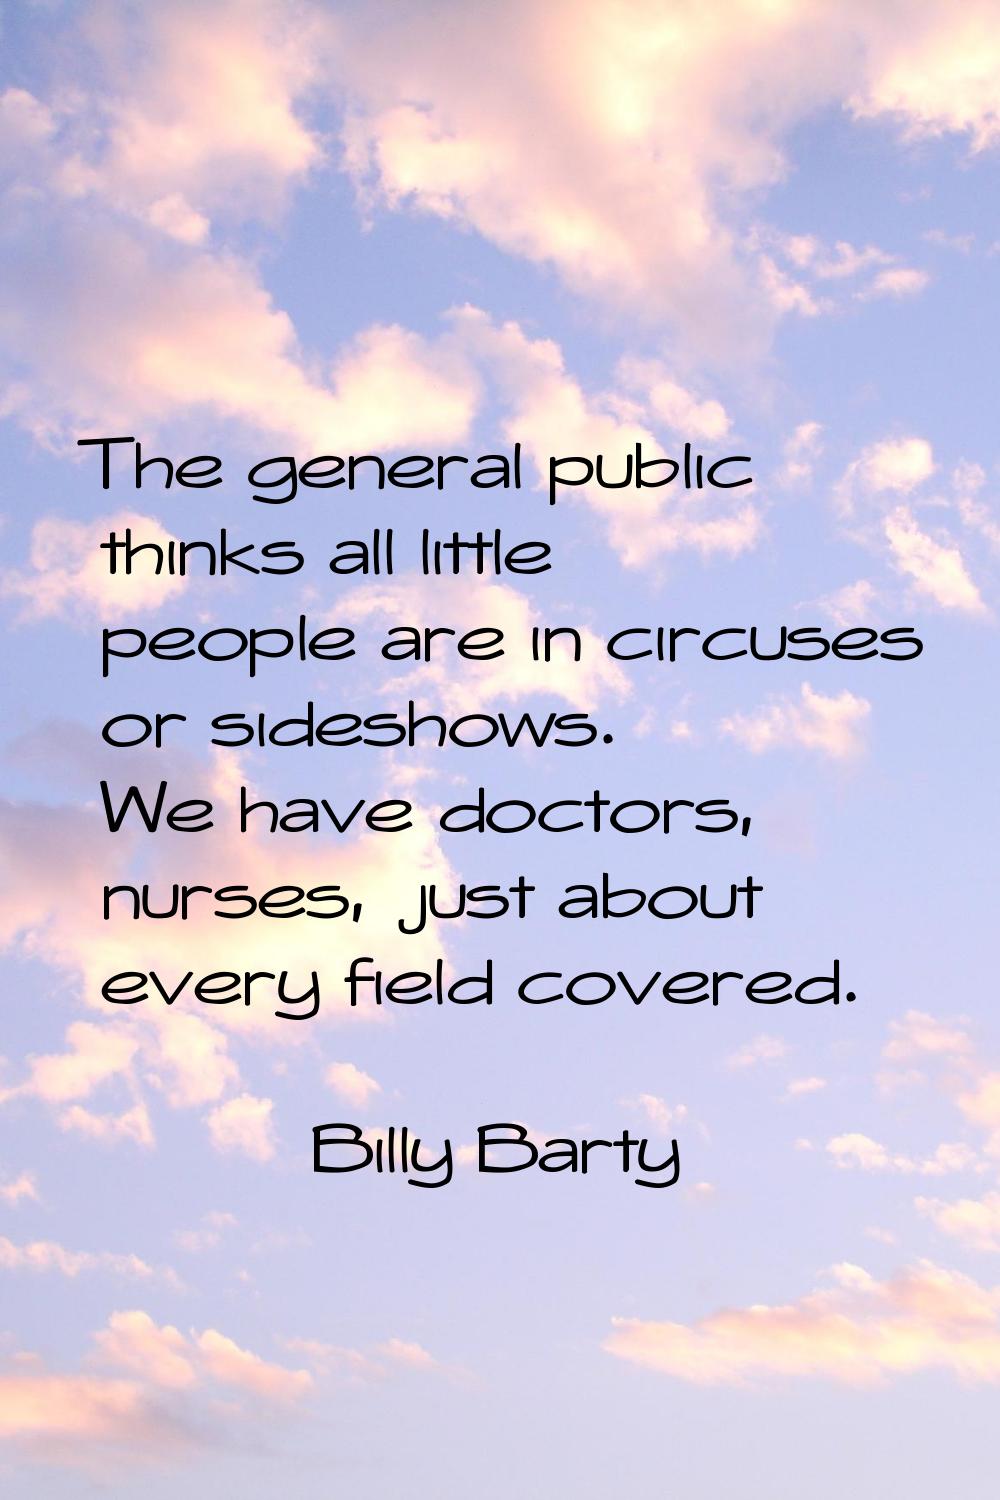 The general public thinks all little people are in circuses or sideshows. We have doctors, nurses, 